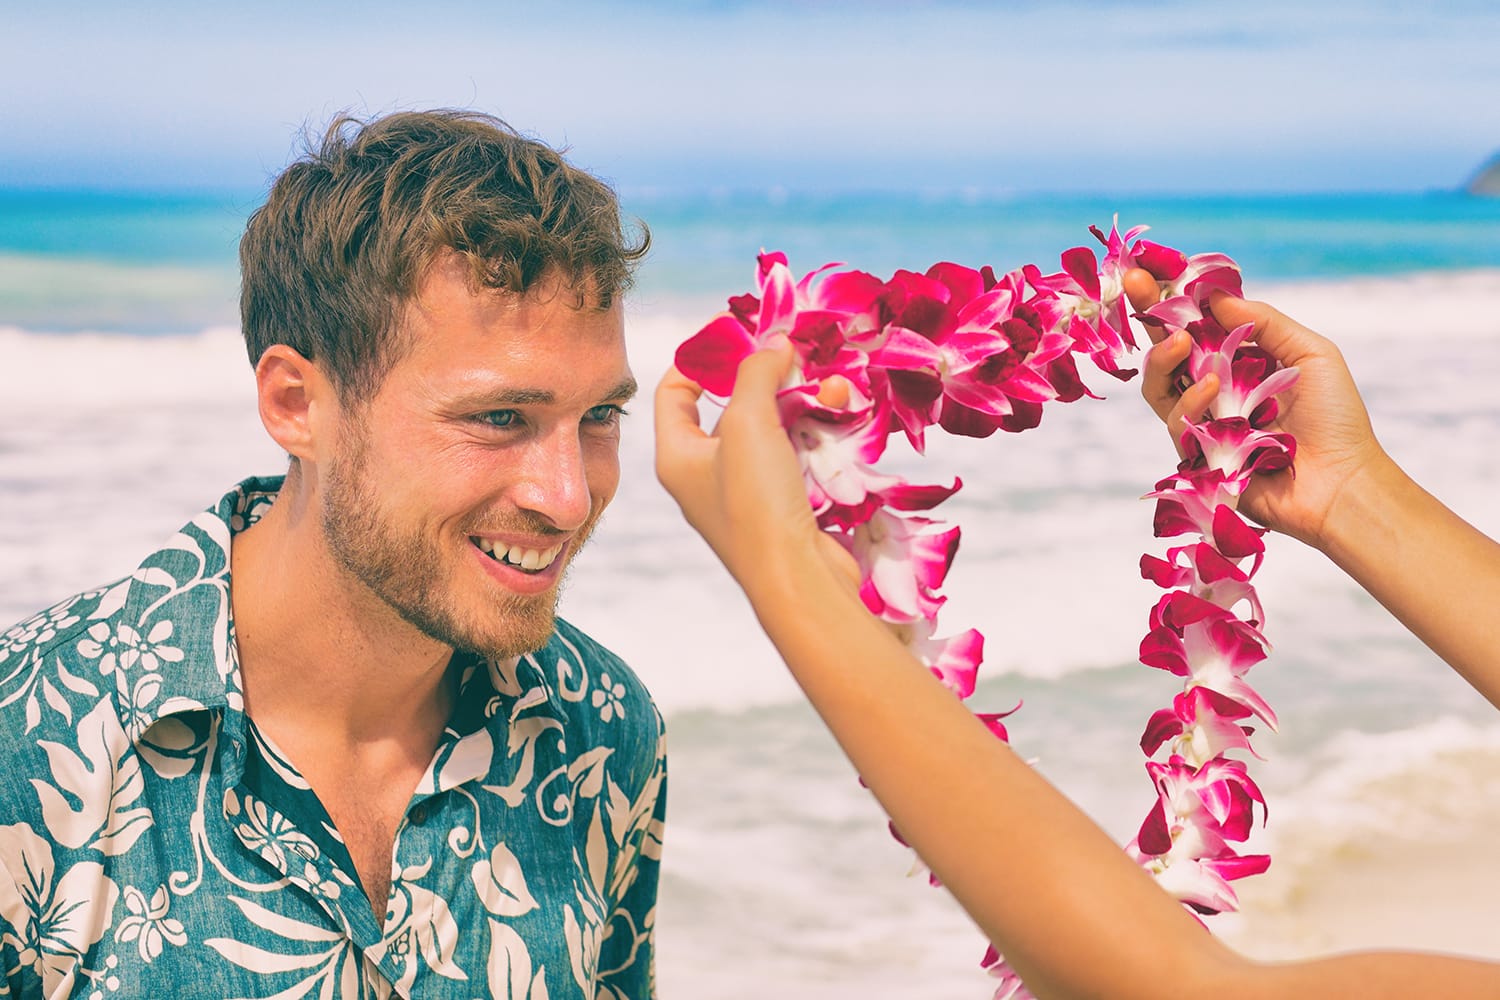 Hawaii woman giving lei flower to welcome a male tourist